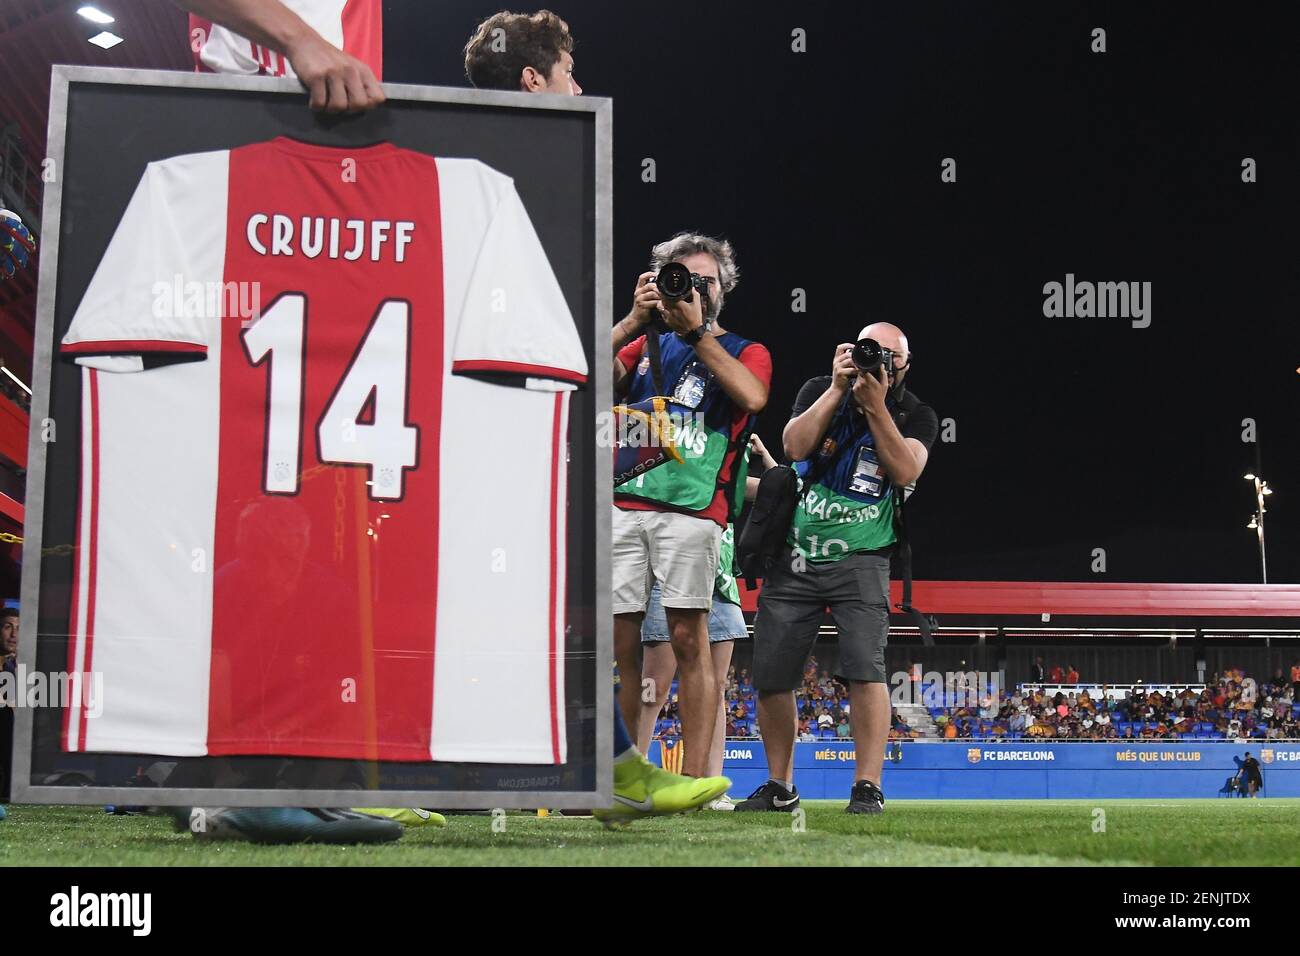 Johan Cruyff shirt with his number during the Johan Cruyff stadium opening  on August 27 in Sant Joan Despi, Barcelona, Spain. (Photo by  pressinphoto/Sipa USA Stock Photo - Alamy